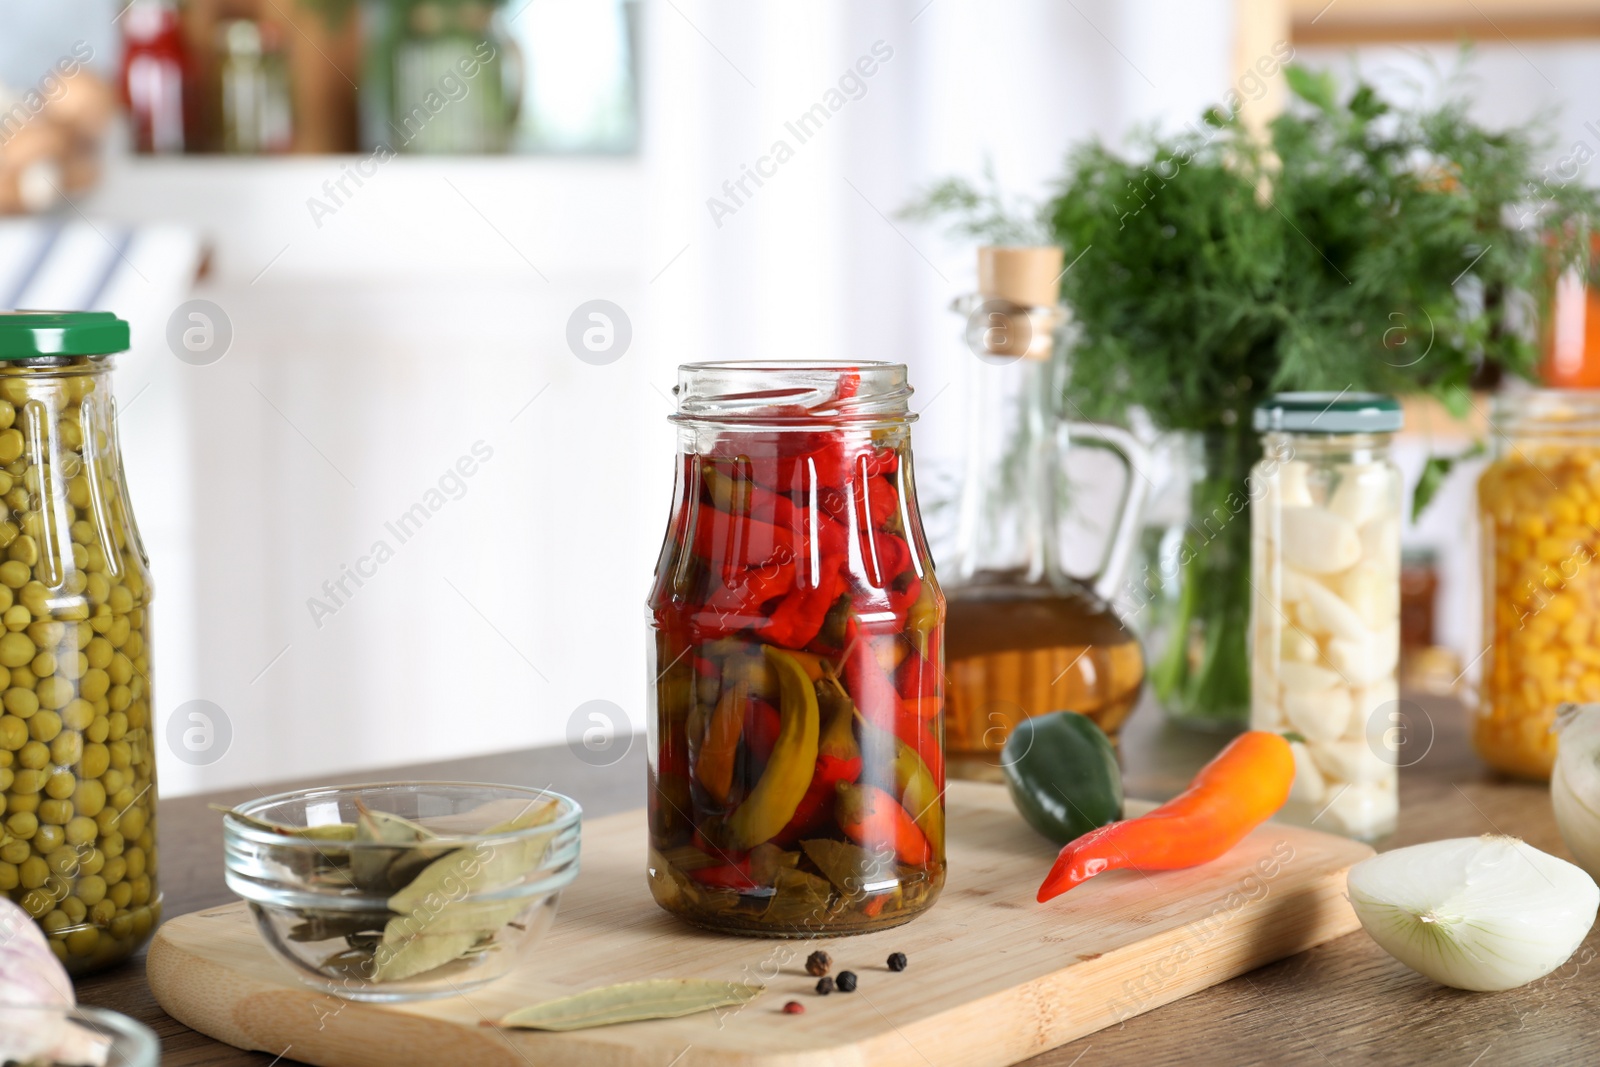 Photo of Jar with pickled chili peppers on wooden table indoors